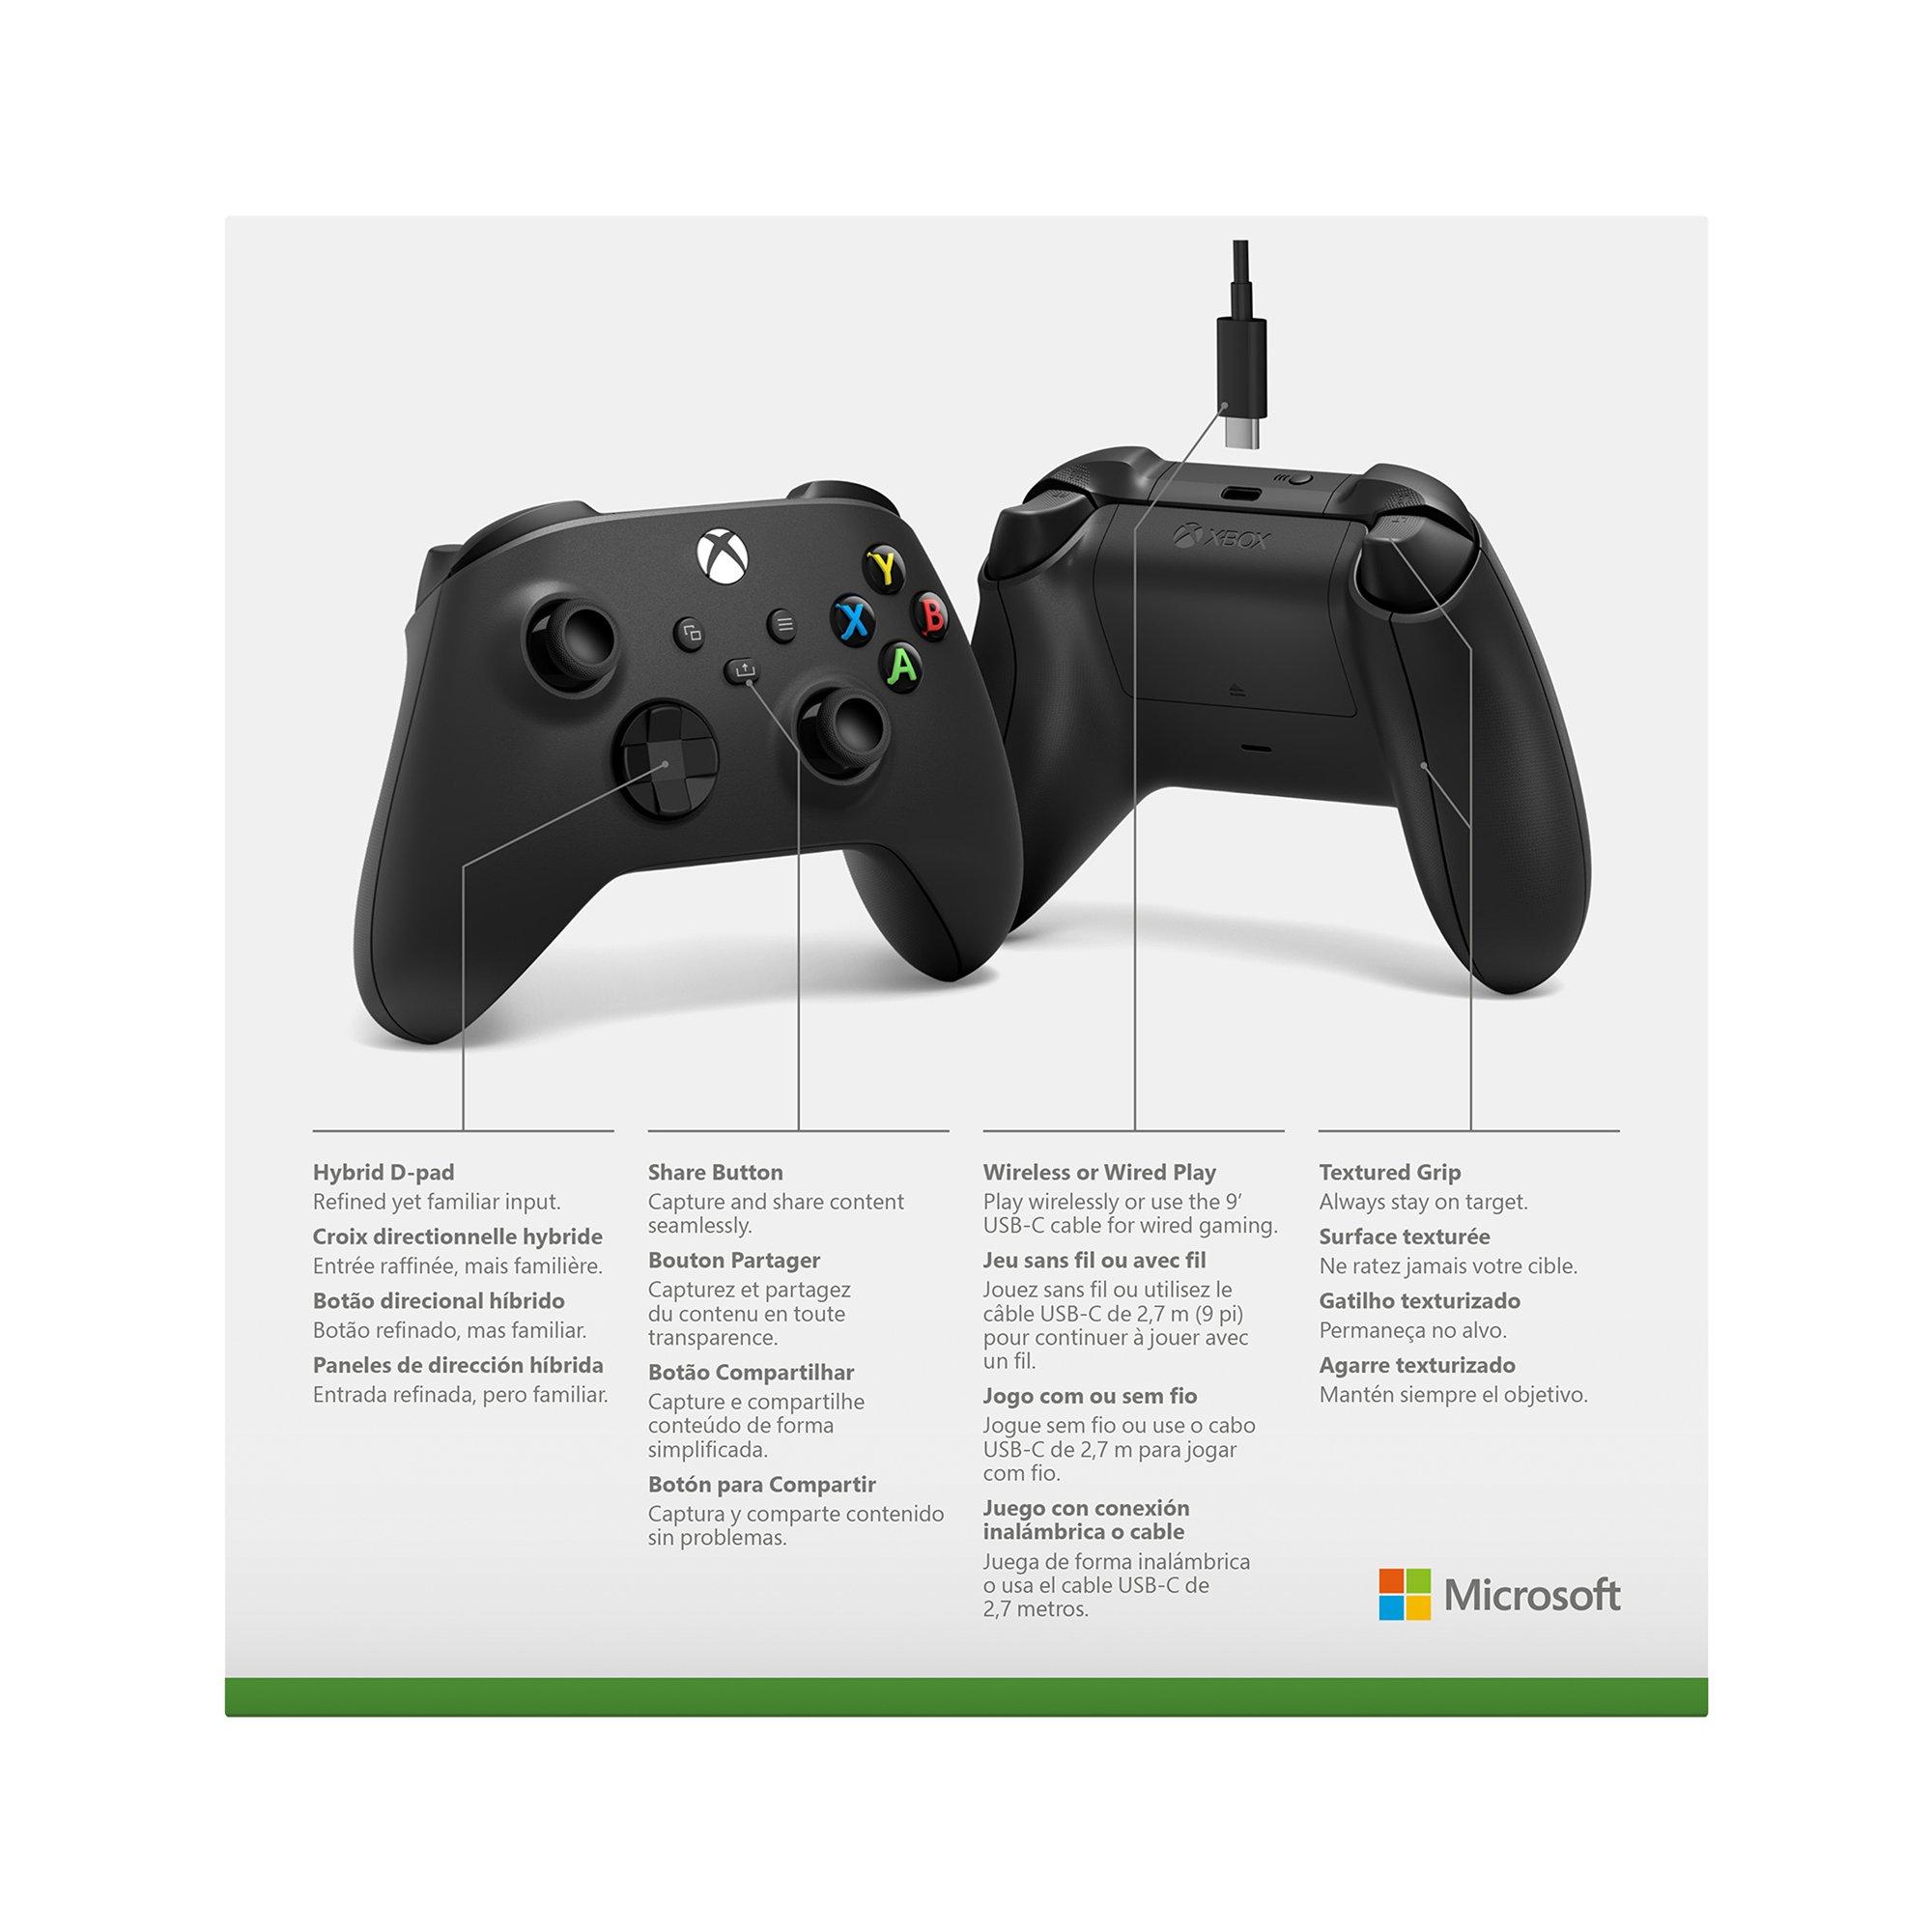 https://media.gamestop.com/i/gamestop/11109966_ALT04/Microsoft-Xbox-Series-X-Wireless-Controller-with-USB-C-Cable?$pdp$